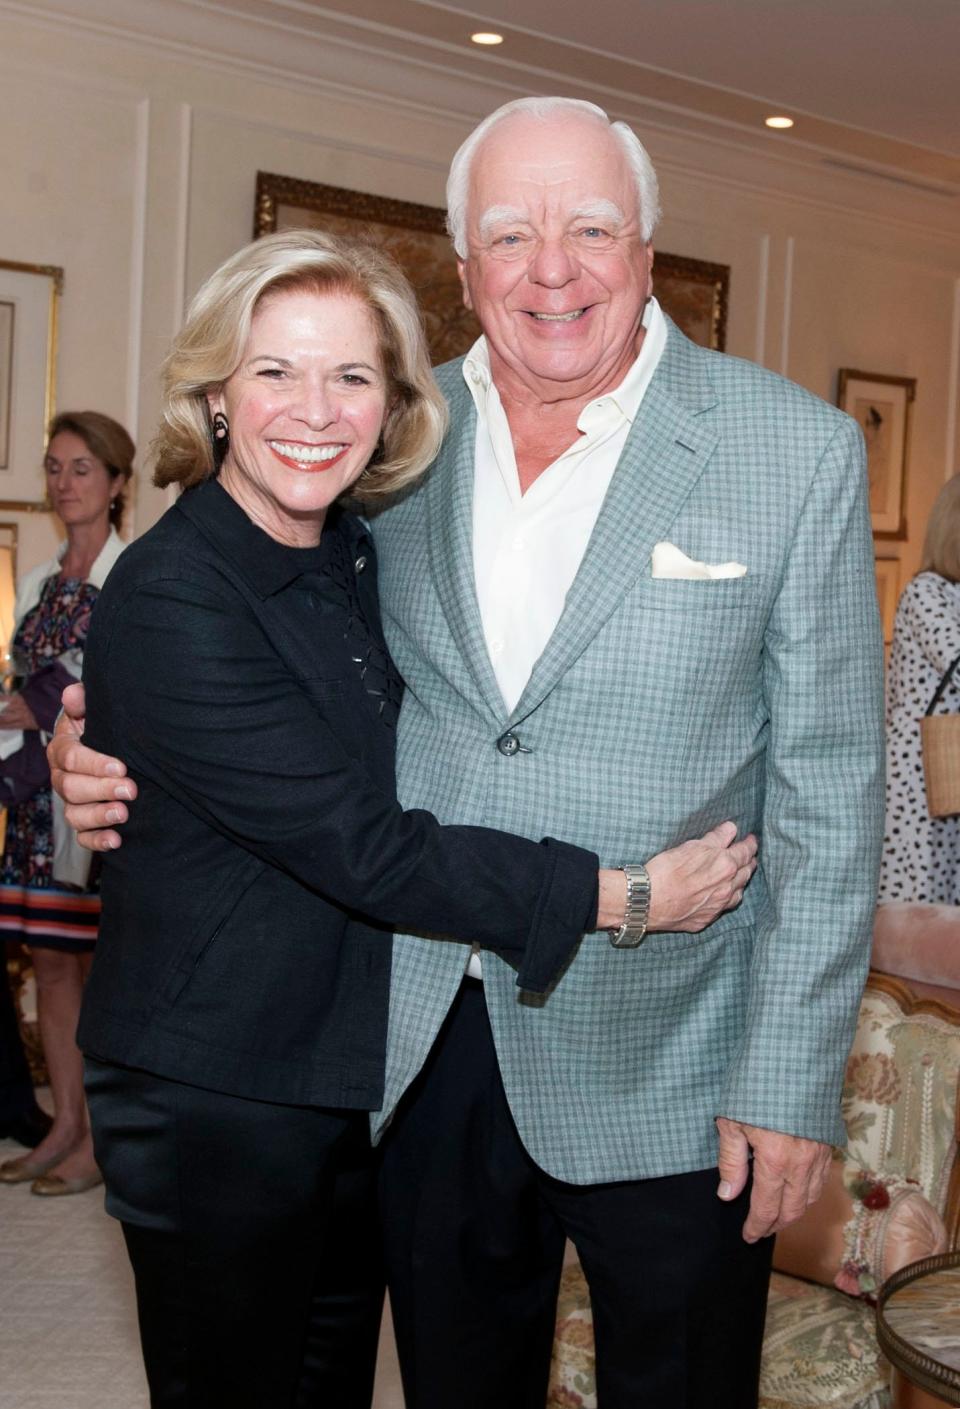 Christine and Robert Stiller at a reception to celebrate the naming of the Michael and Annie Falk Foundation Environmental Exposomics Laboratory at Duke University at a private home Feb. 13, 2019 in Palm Beach.